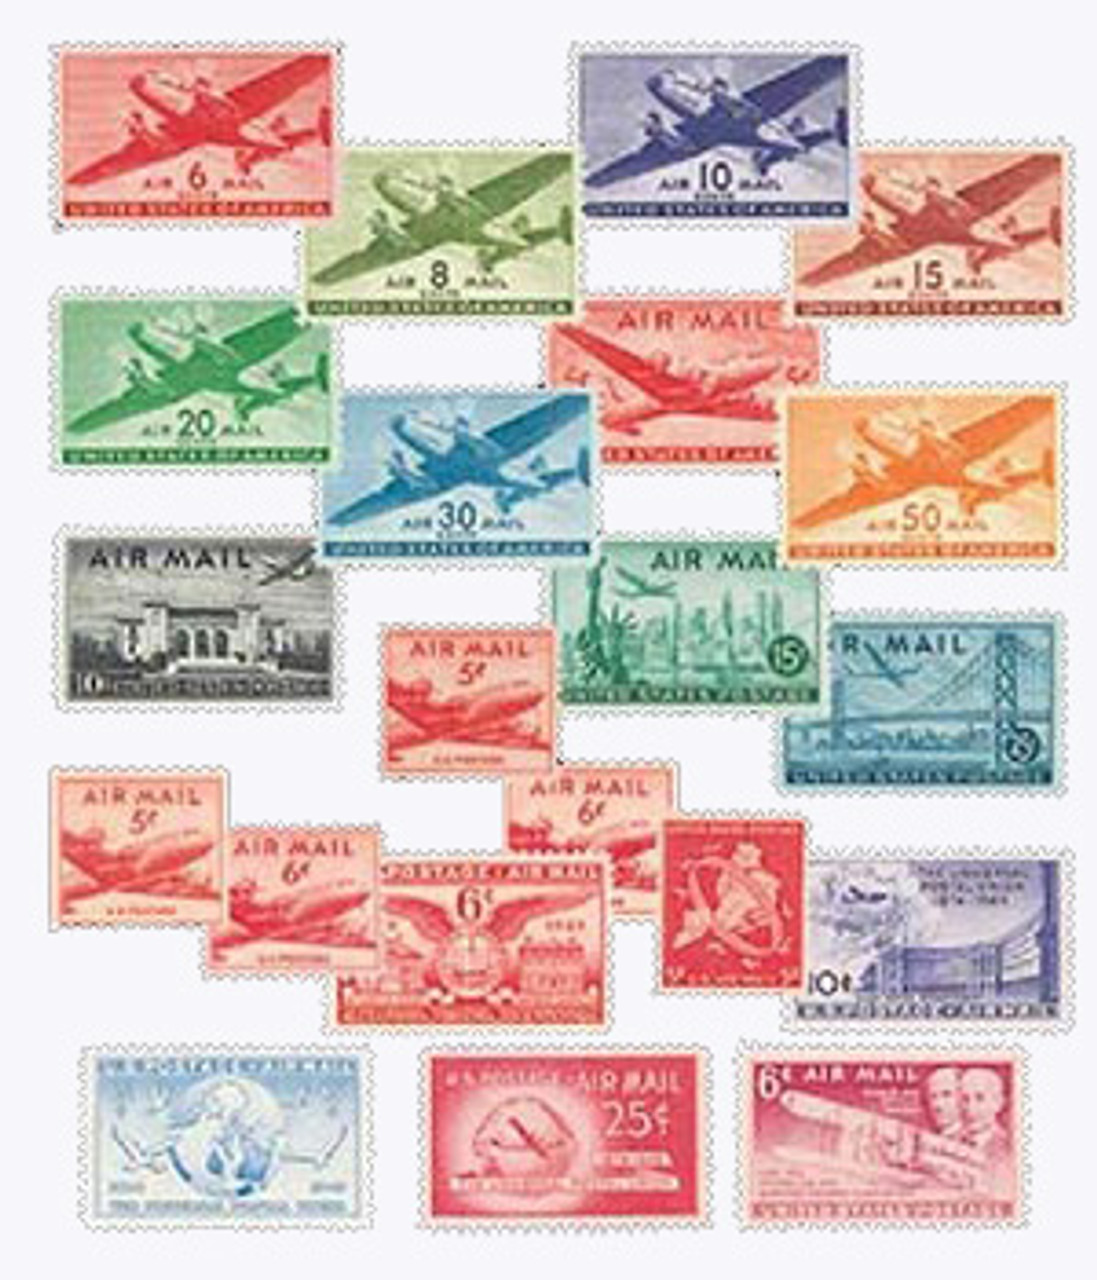 C25-45 - 1940s Airmail Collection, 21v Mint - Mystic Stamp Company